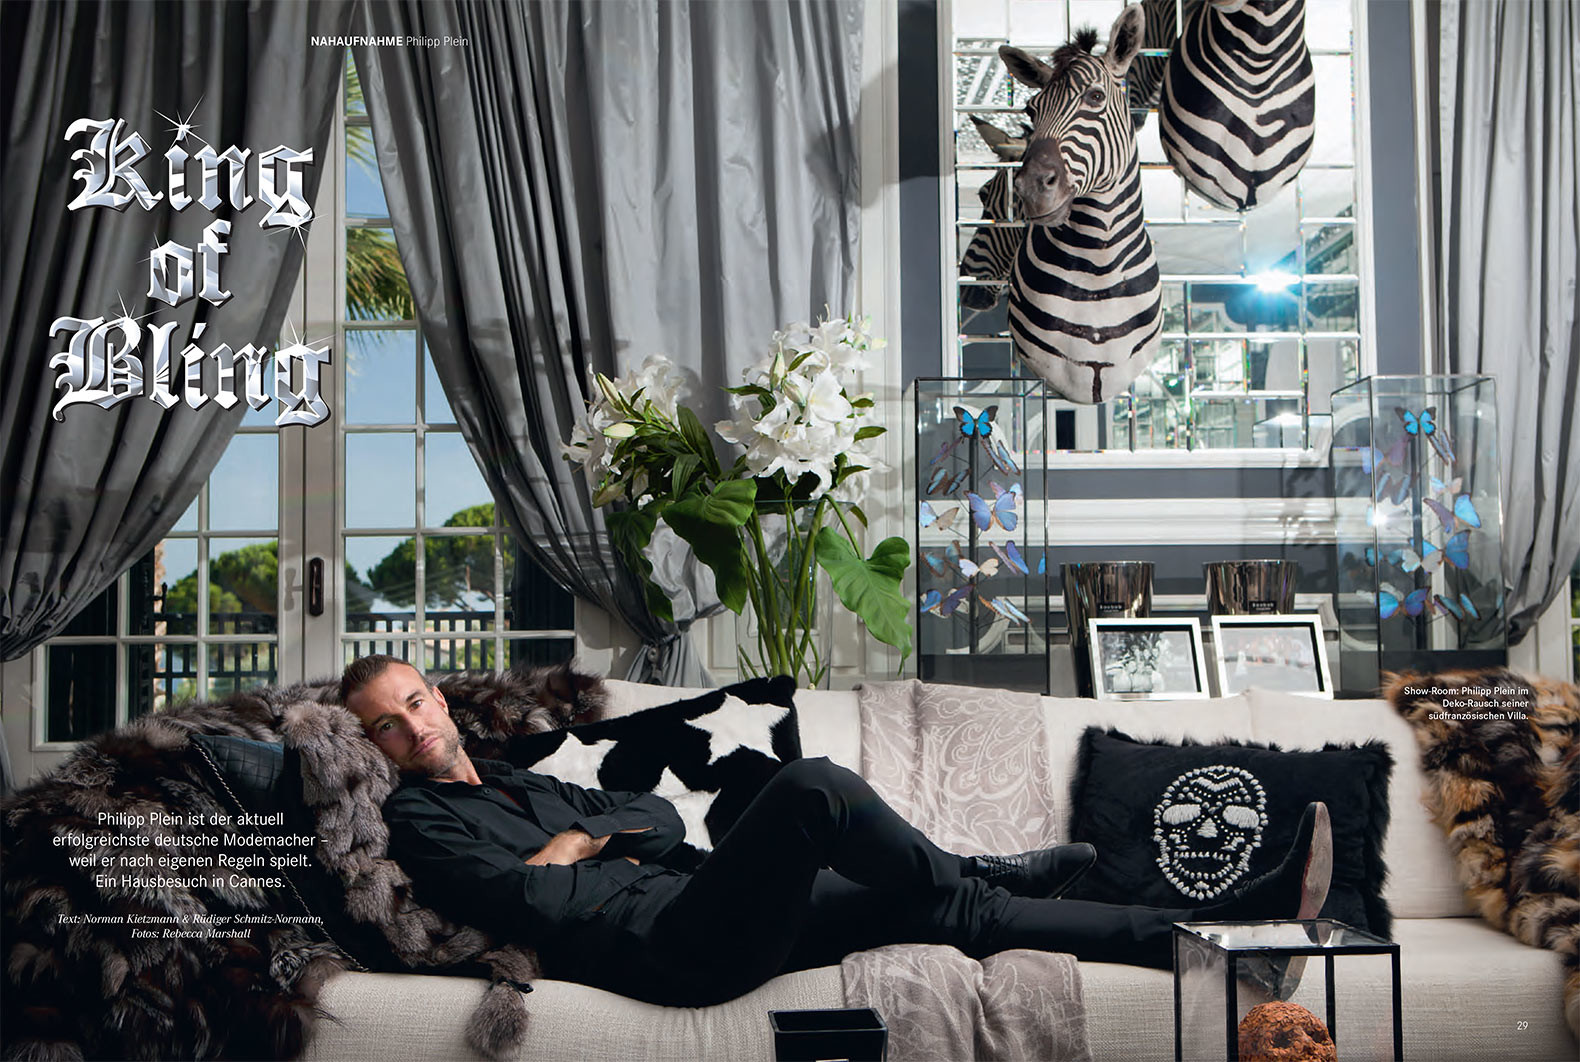 Tearsheet of page layout of Handelsblatt magazine showing double page portrait of Philipp Plein lying on a couch